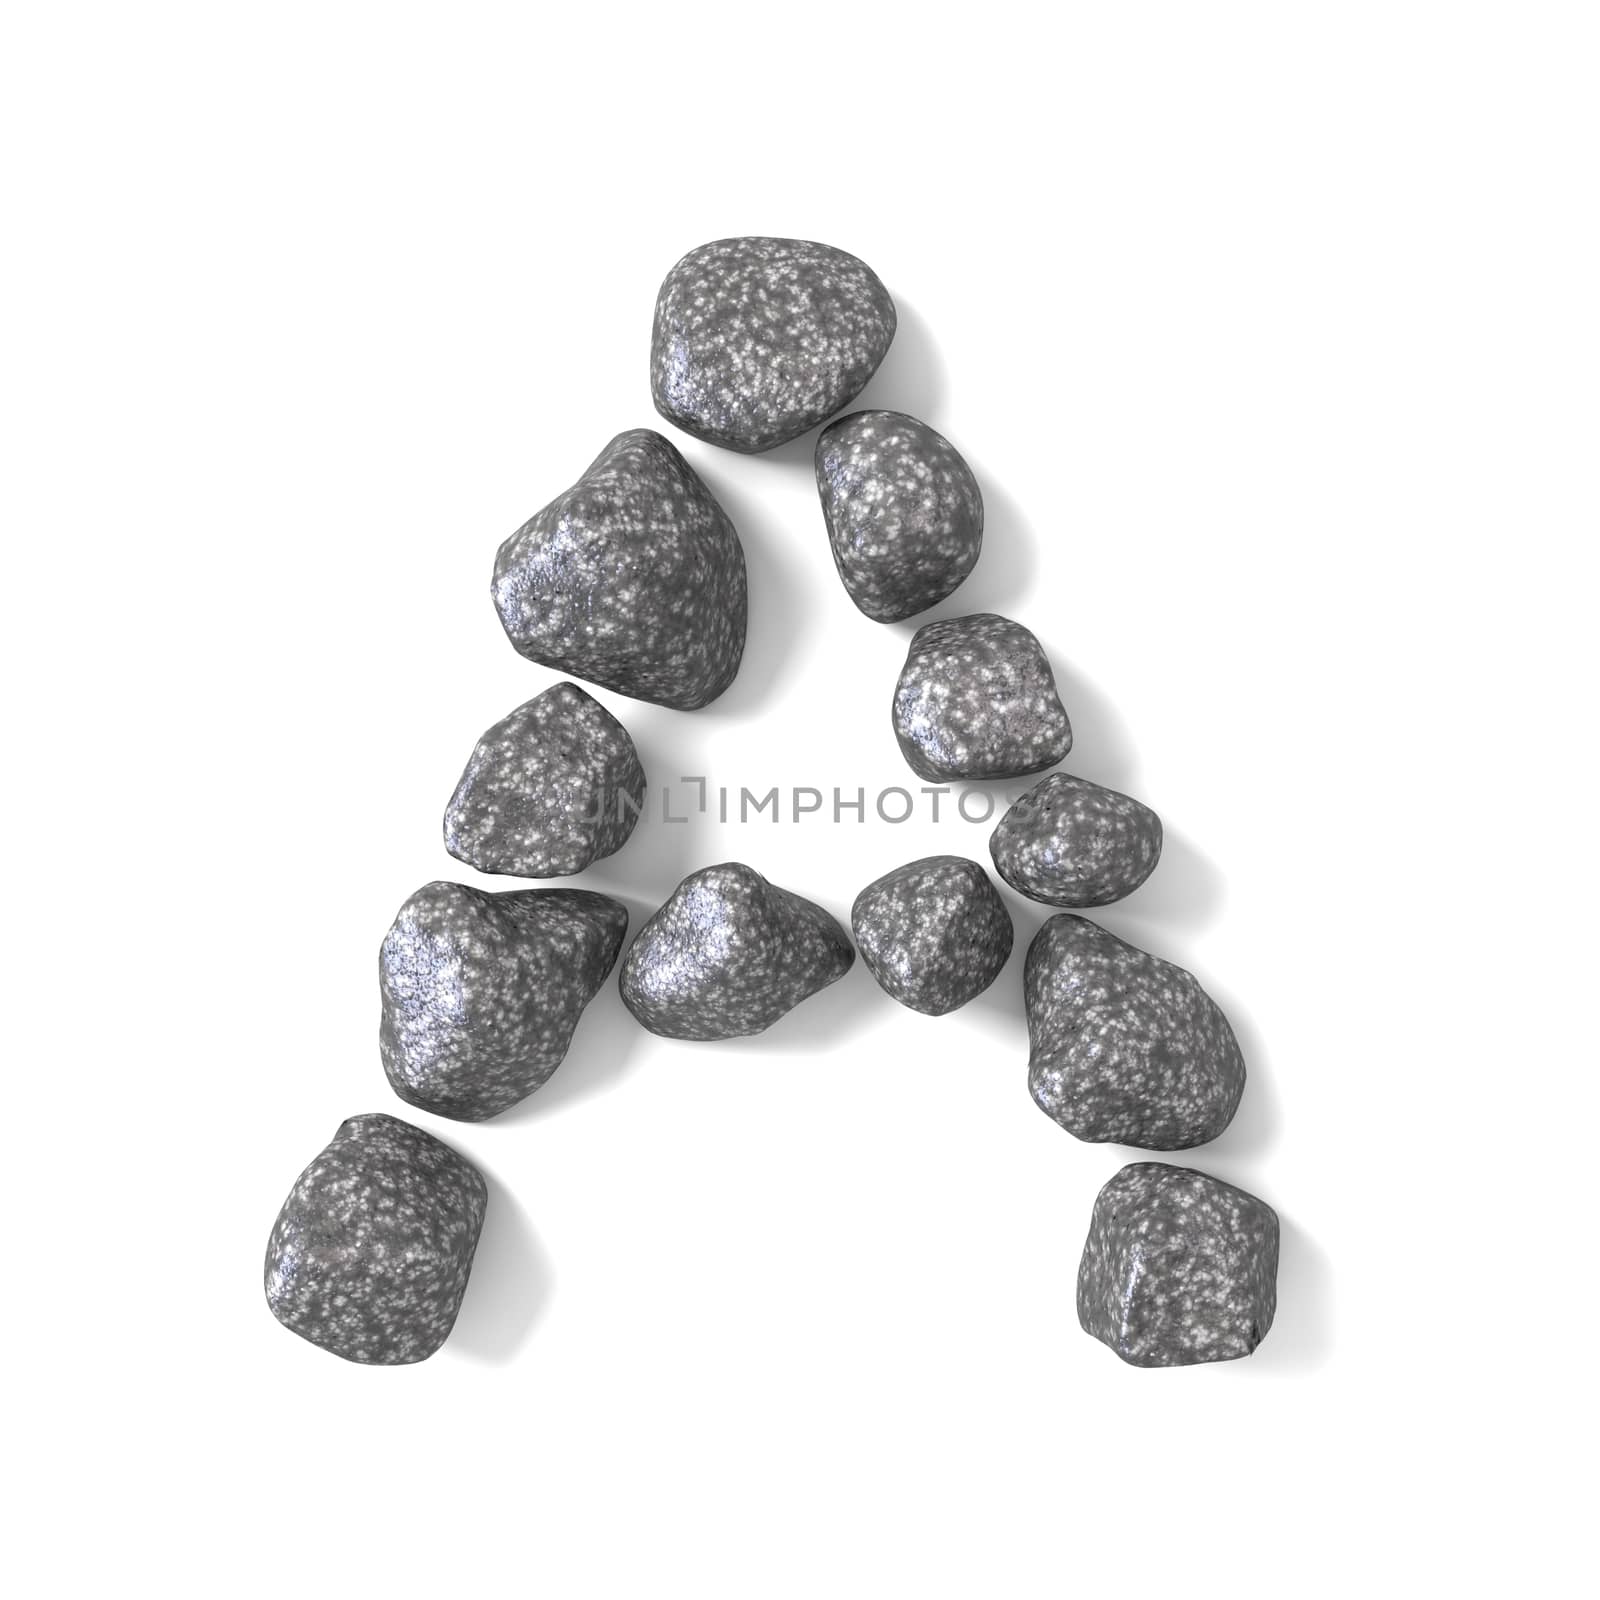 Font made of rocks LETTER A 3D by djmilic